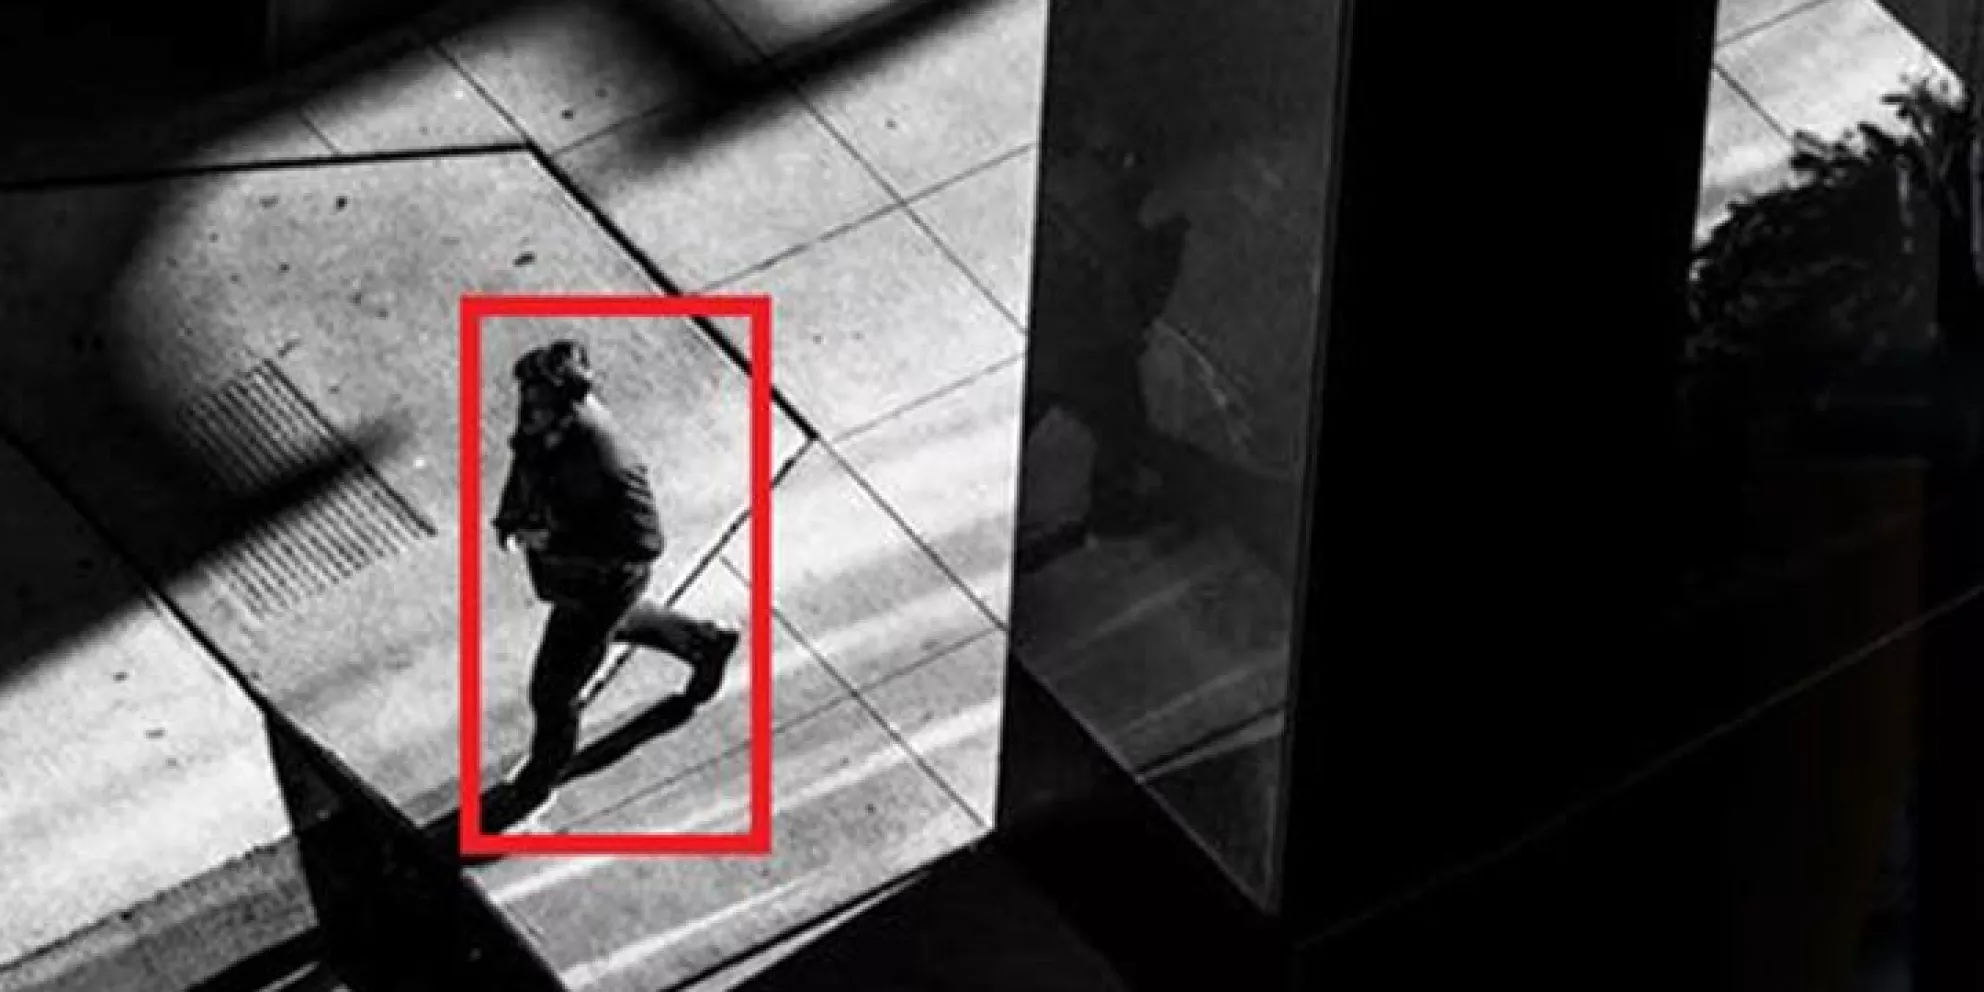 Security footage with red square around person